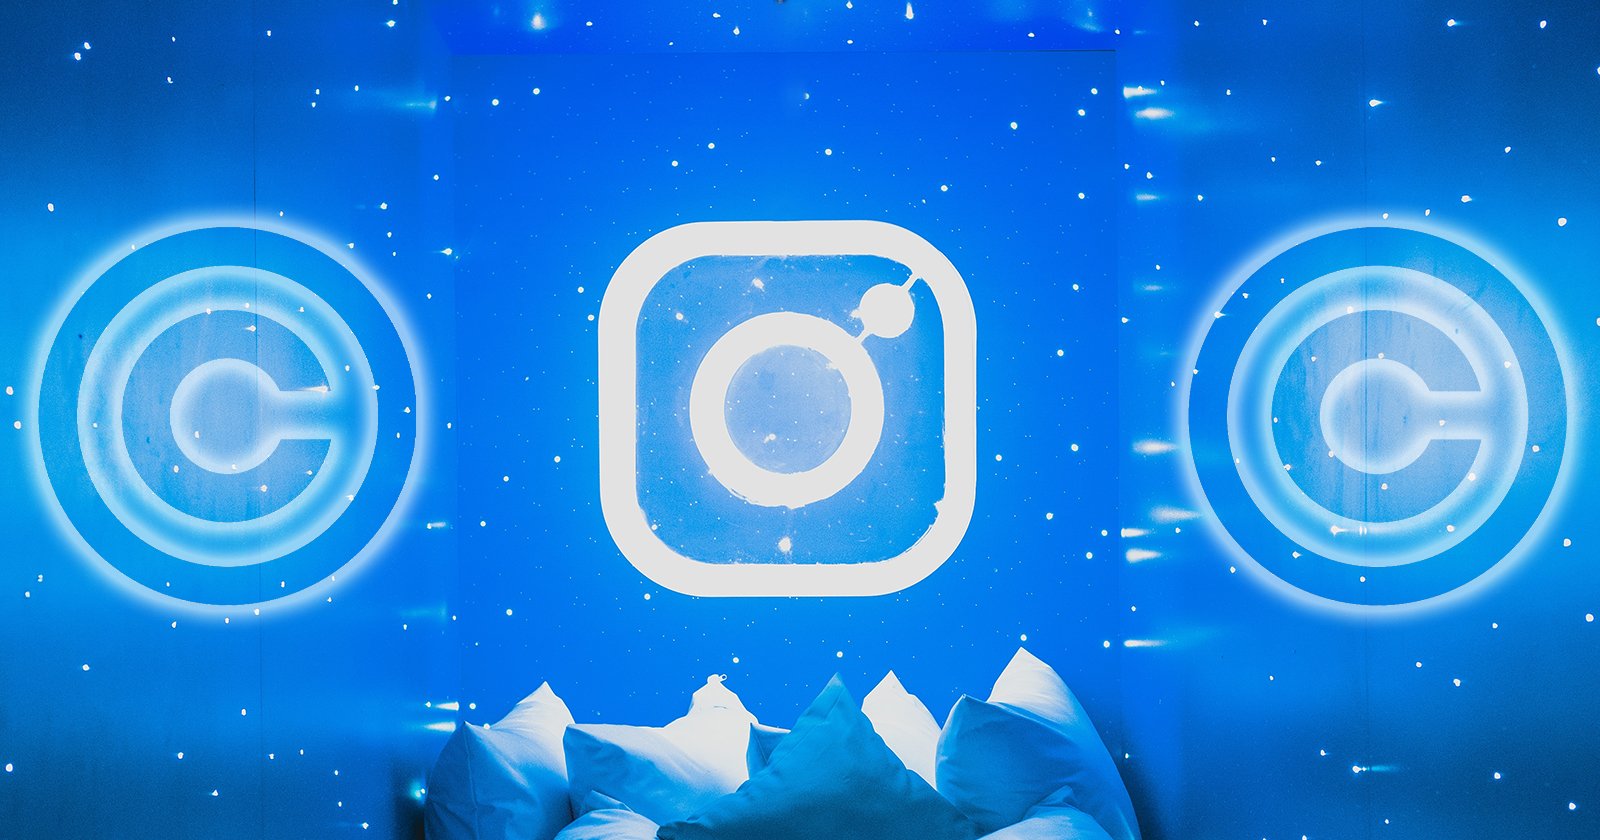 Instagram Says You Need Permission to Embed Someone’s Public Photos